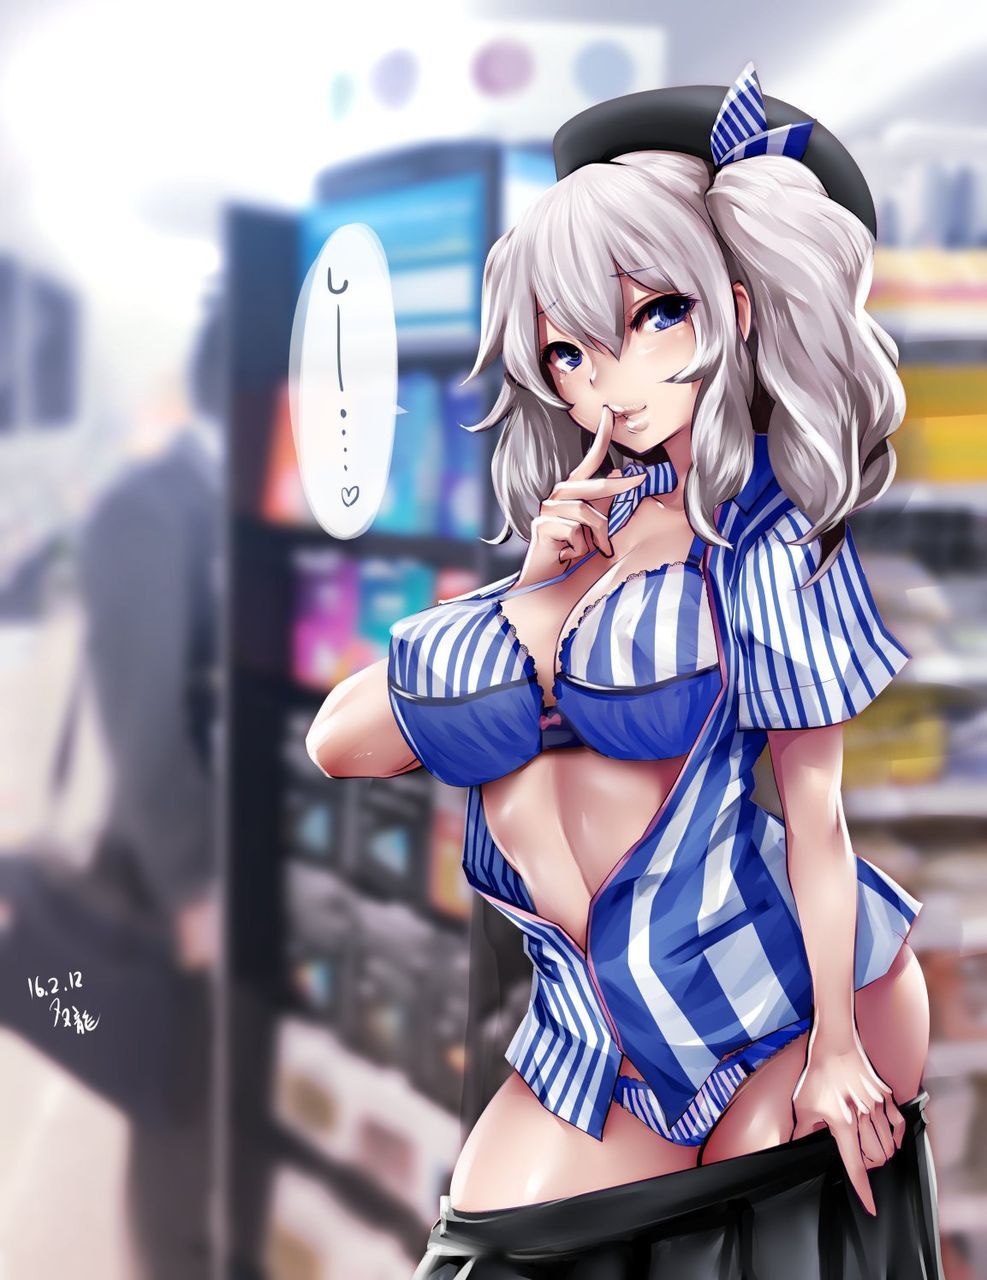 【Armada Kokushoon】High-quality erotic images that can be made into Kashima wallpaper (PC / smartphone) 6